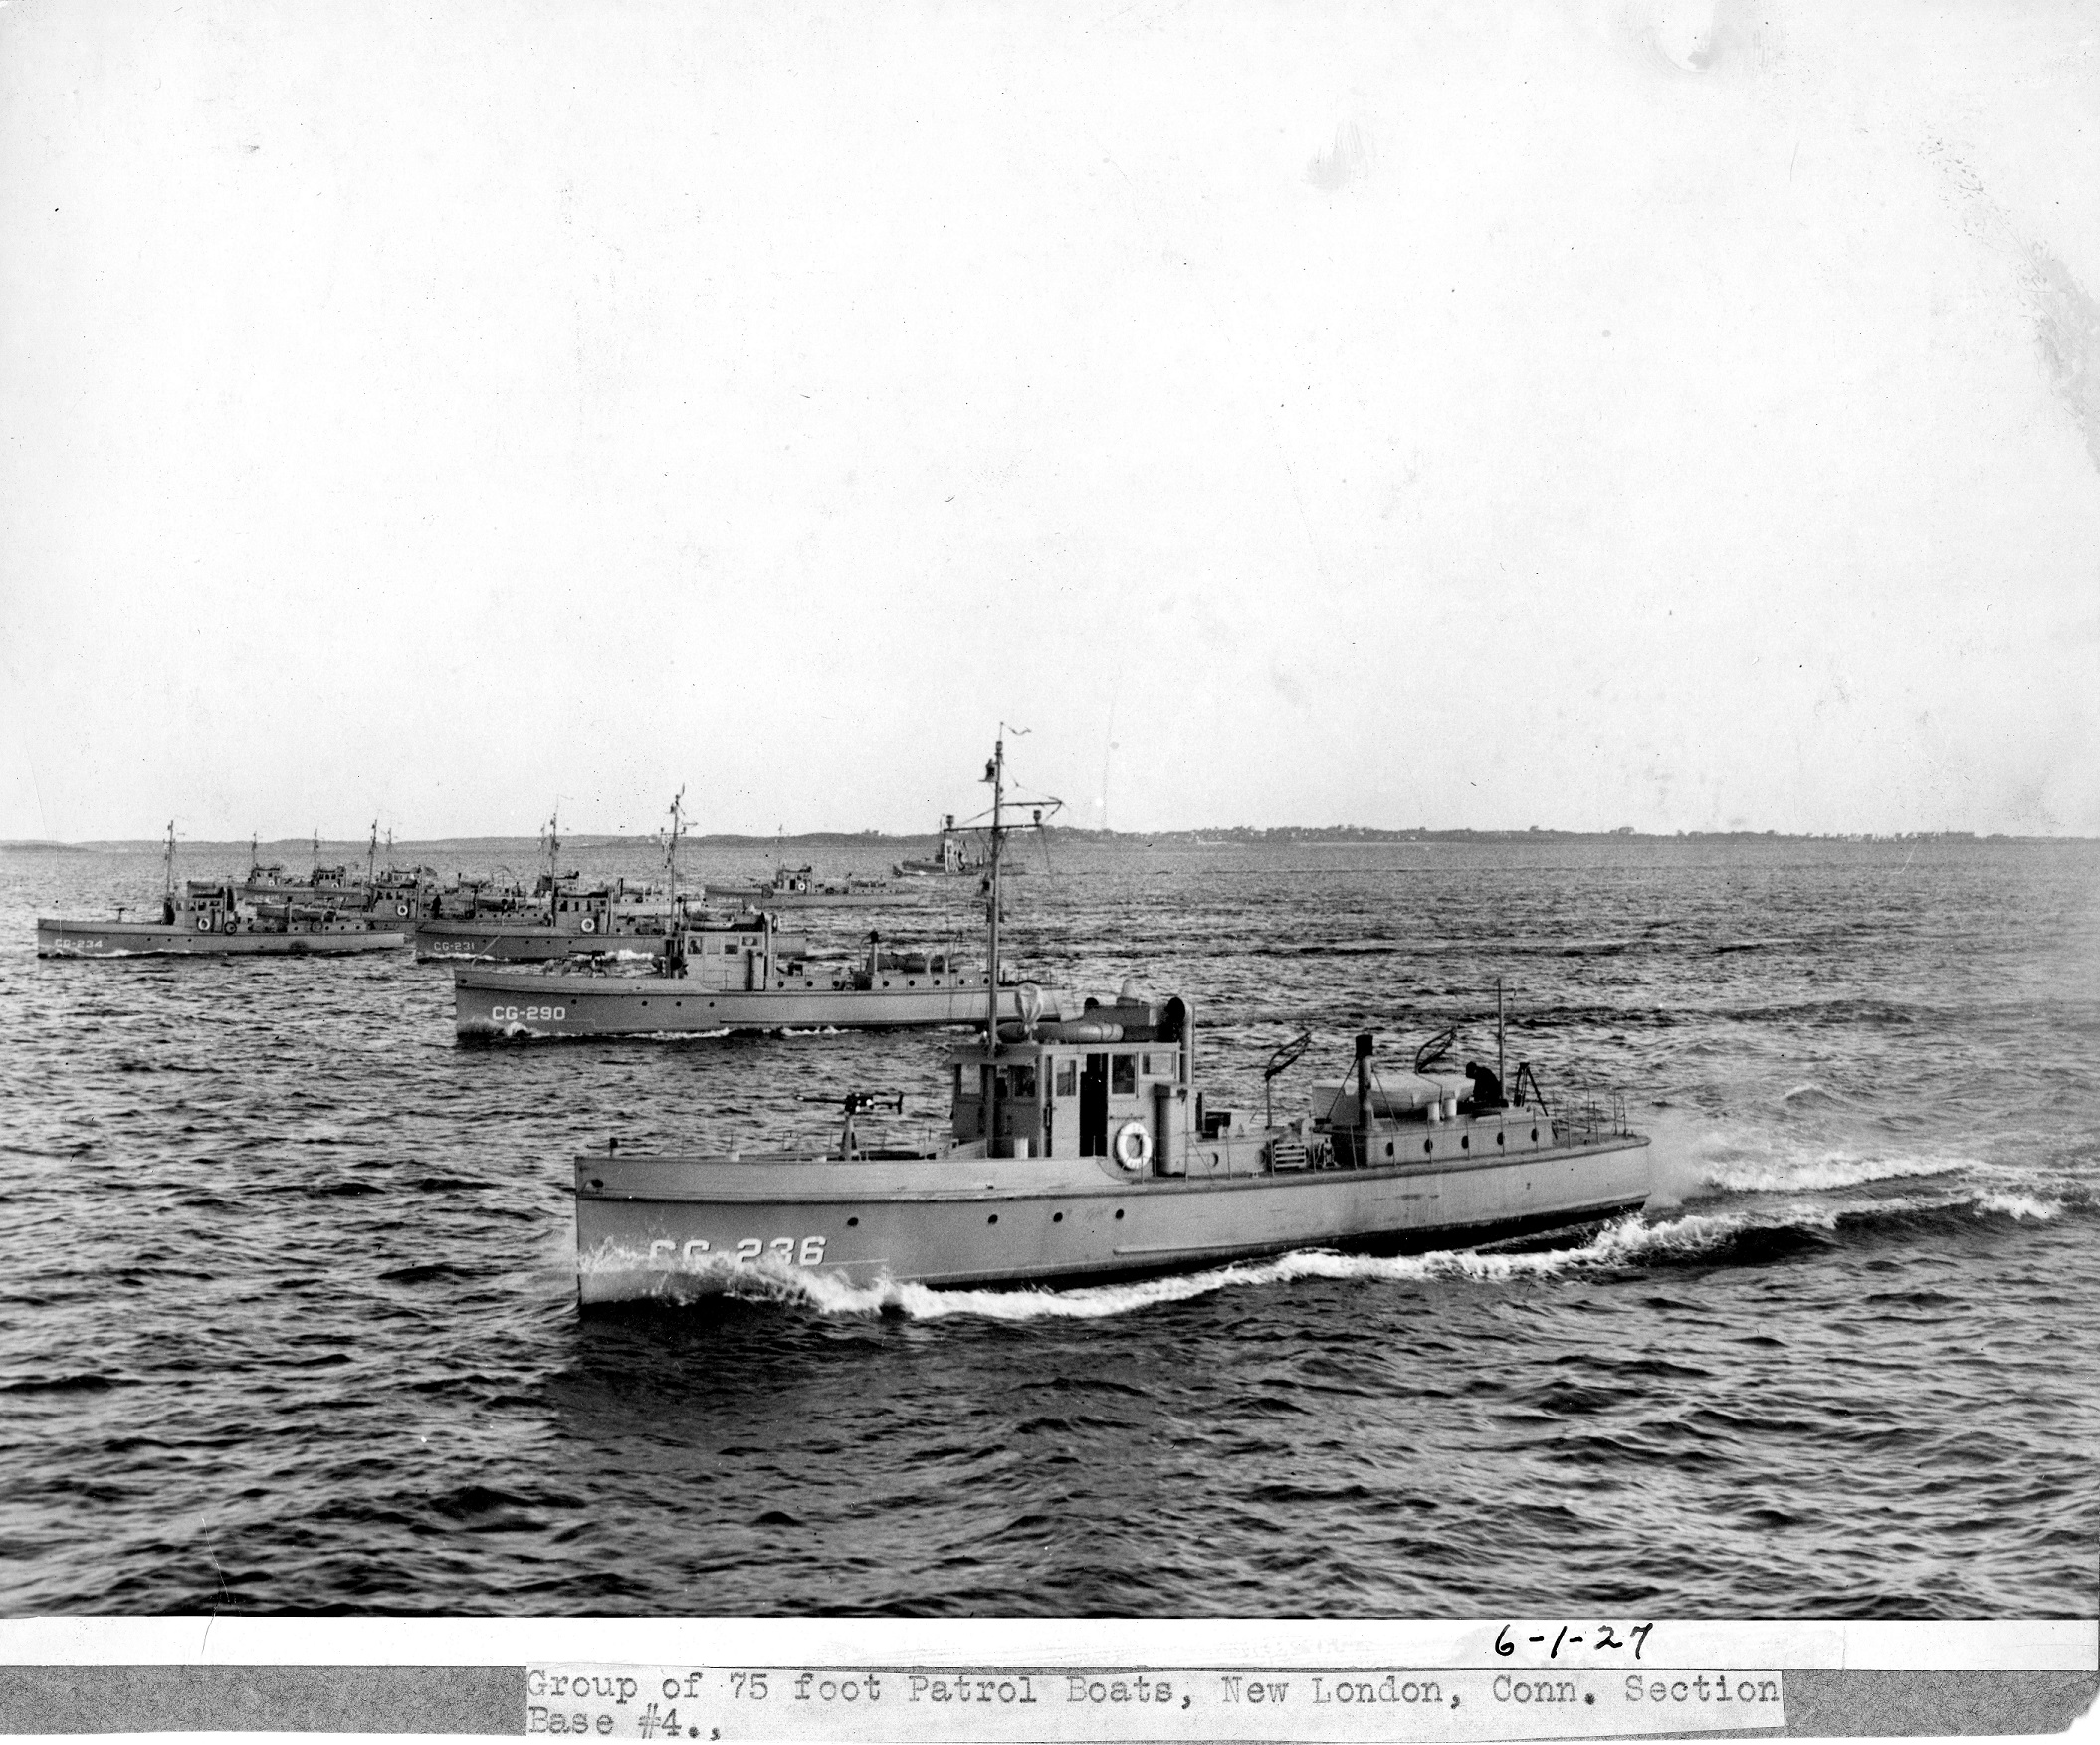 3.	Image of the fleet of 75-foot cutters stationed at New London, Connecticut. Tantaquidgeon’s CG-289 is likely one of the “six-bitters” located in the background. (U.S. Coast Guard)